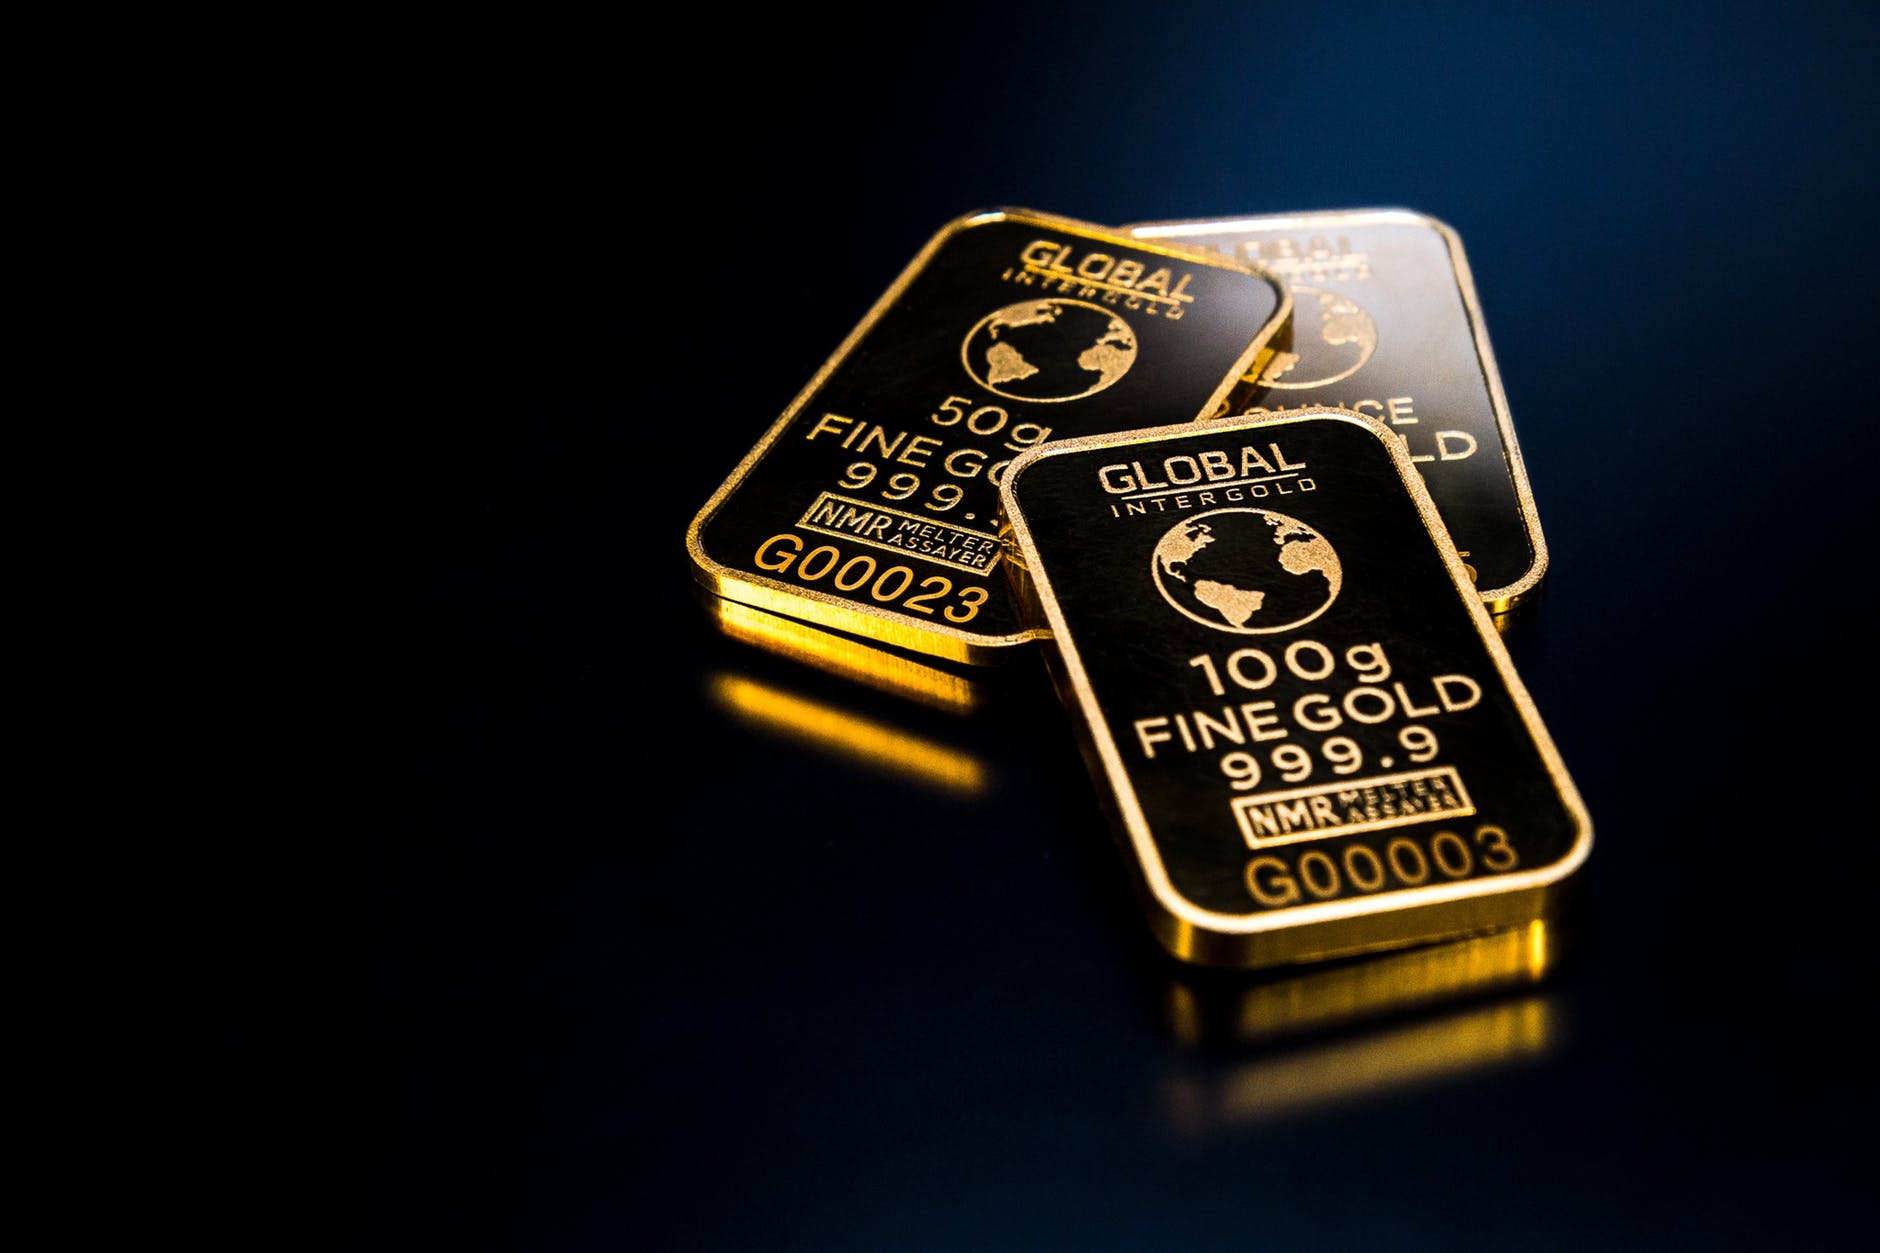 Why should you look to invest in Gold?